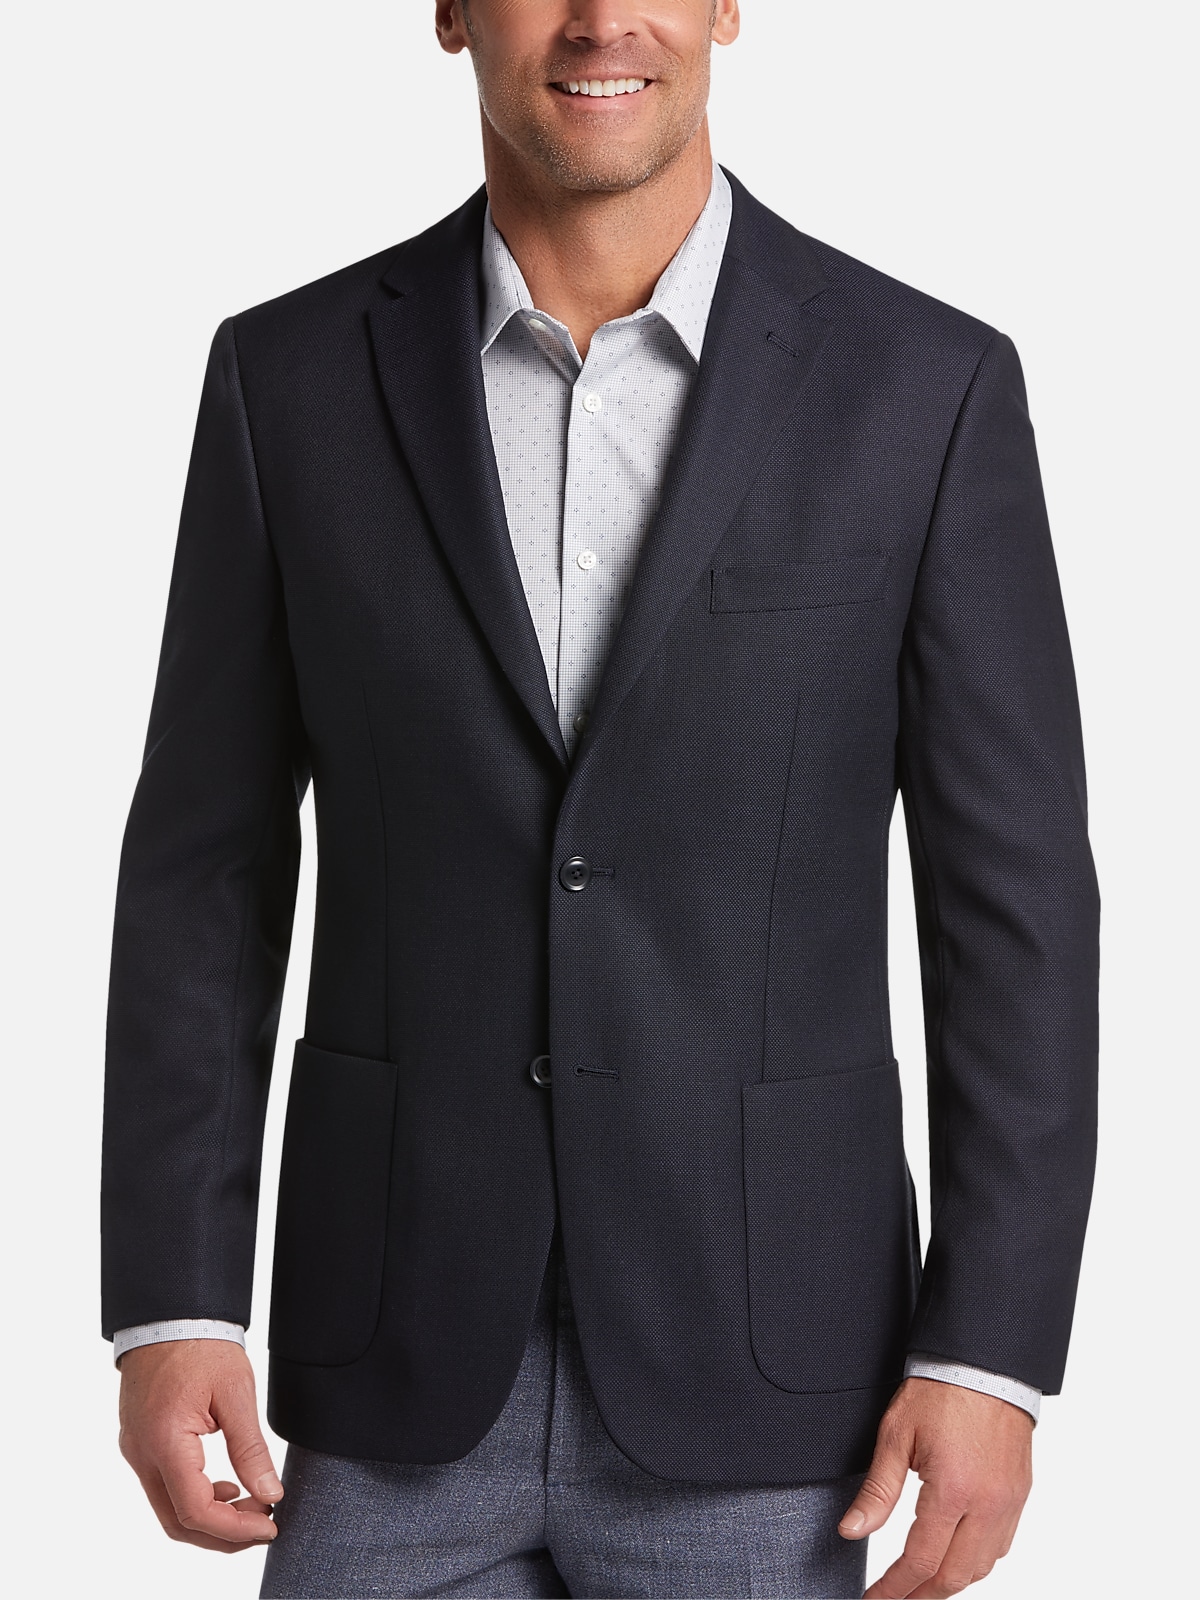 https://image.menswearhouse.com/is/image/TMW/TMW_158R_01_TOMMY_HILFIGER_SPORT_COATS_NAVY_MAIN?imPolicy=pdp-zoom-mob